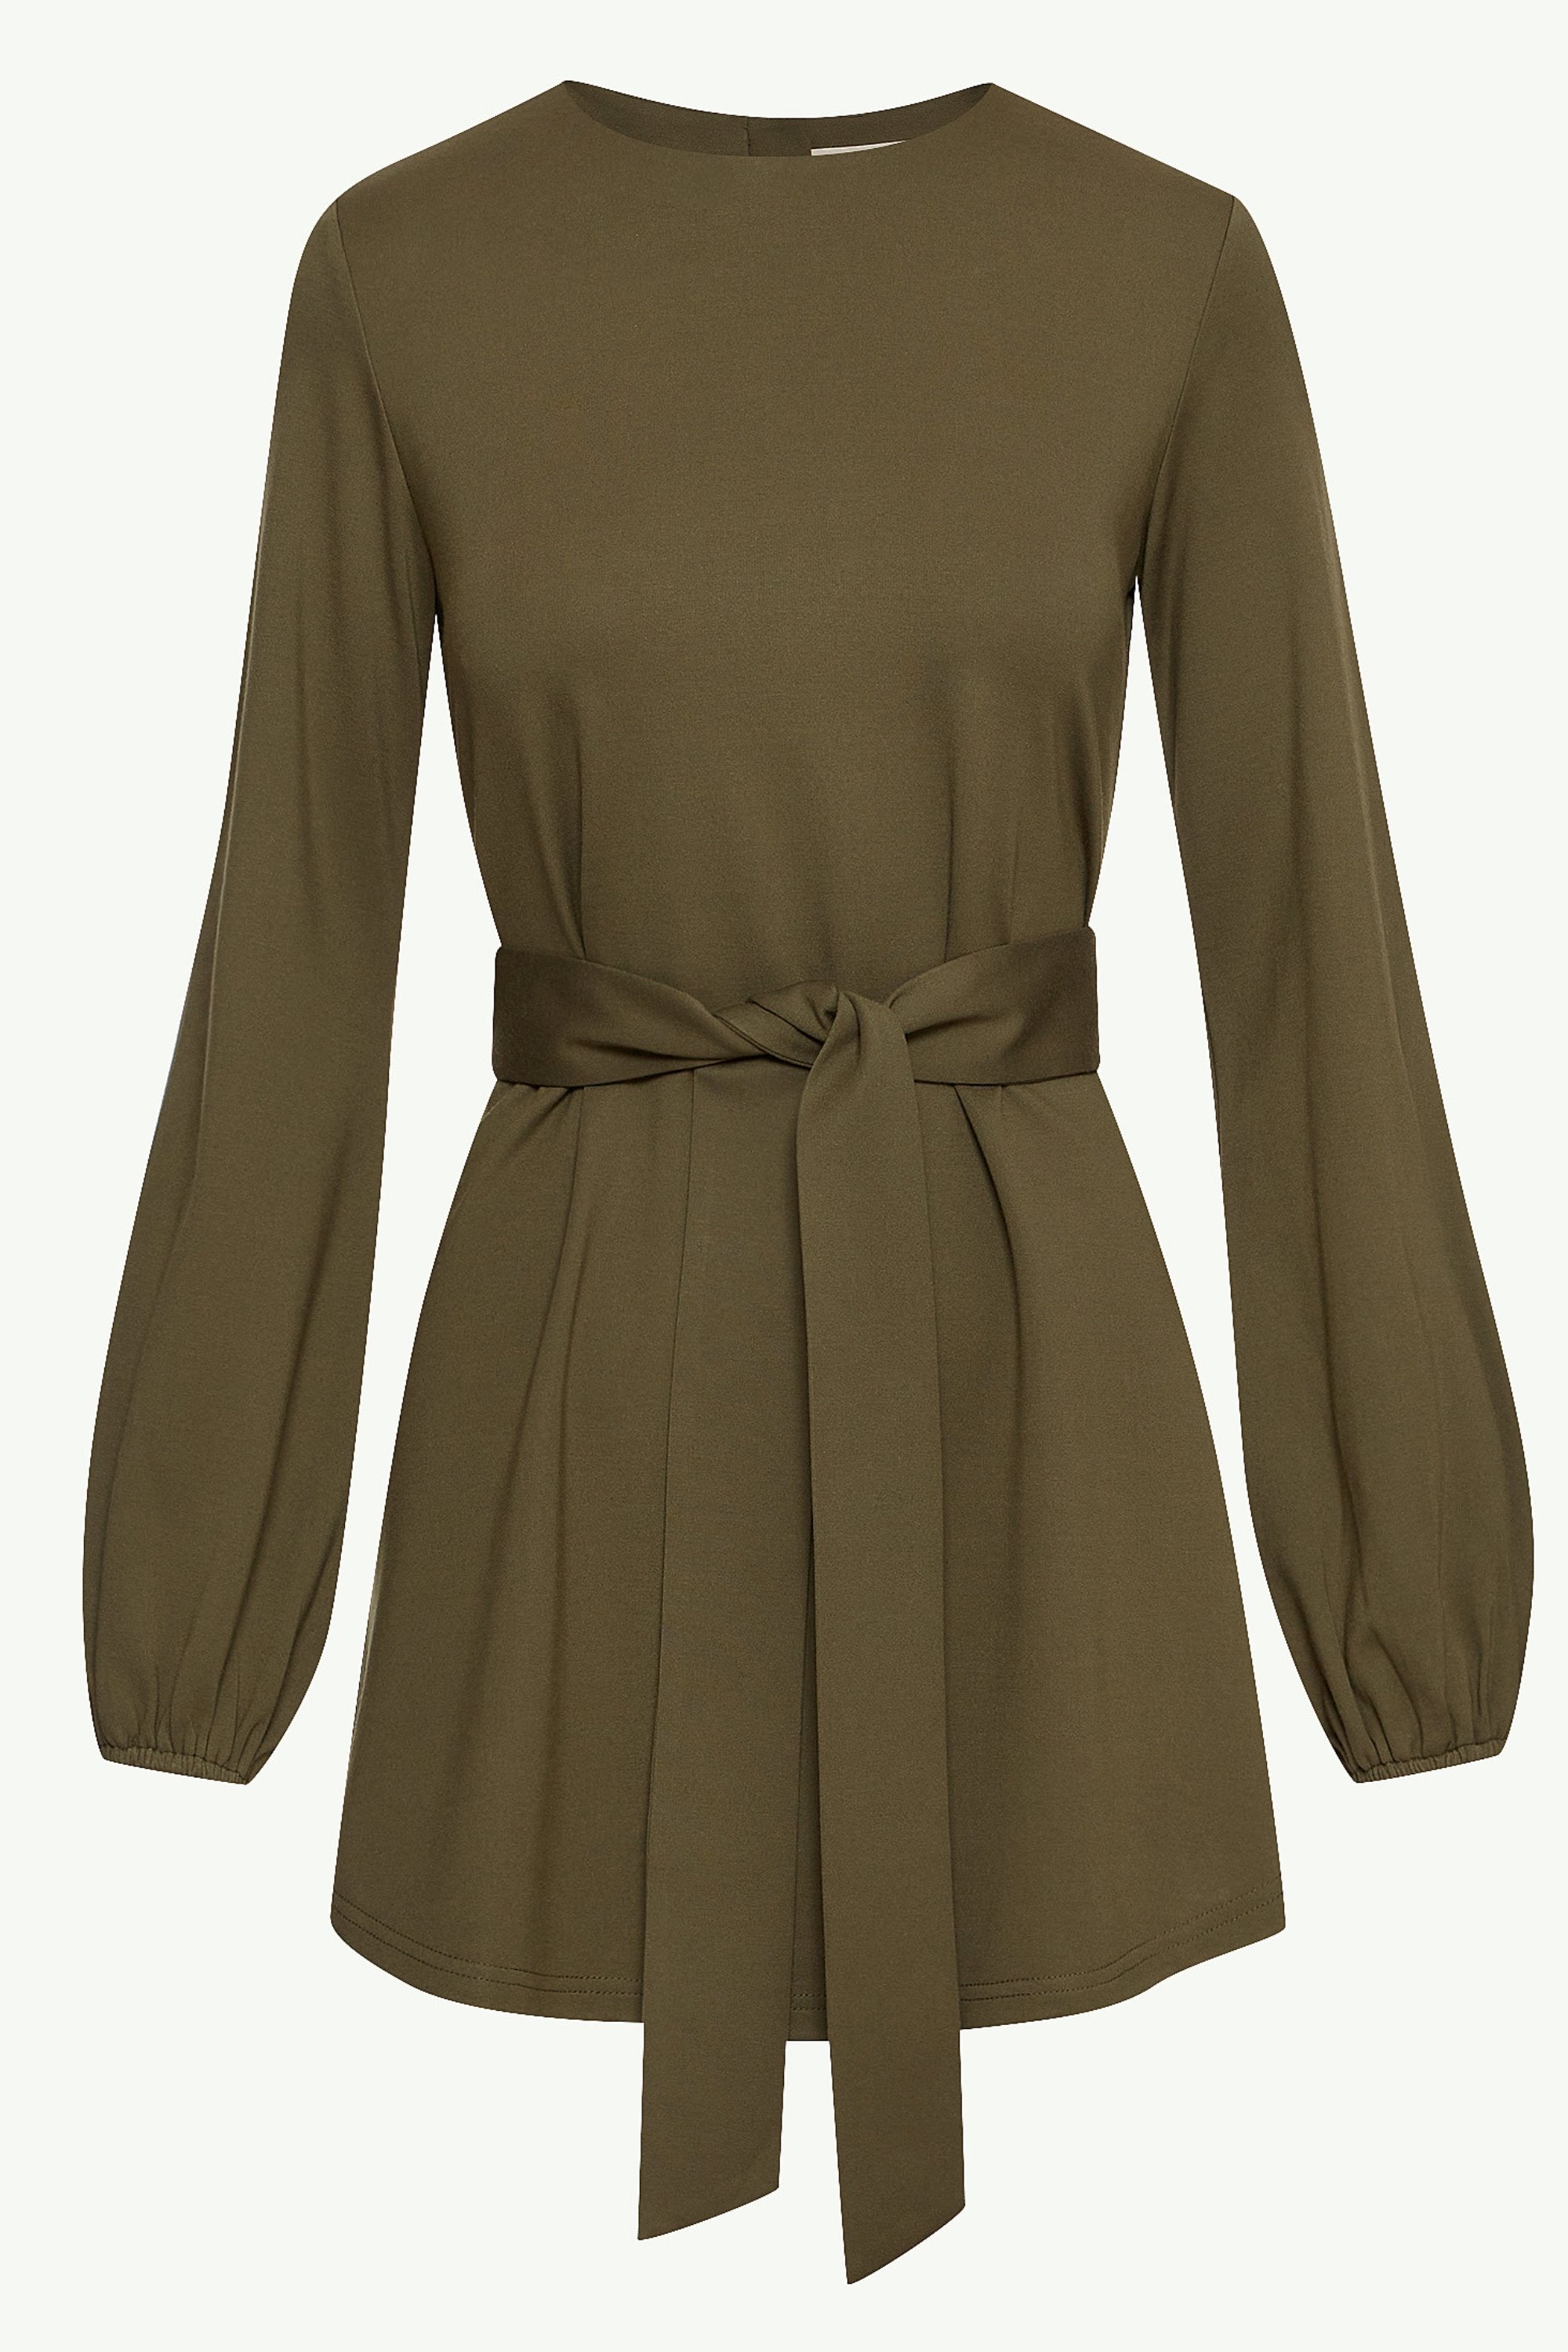 Fatima Everyday Belted Jersey Top - Olive Clothing epschoolboard 